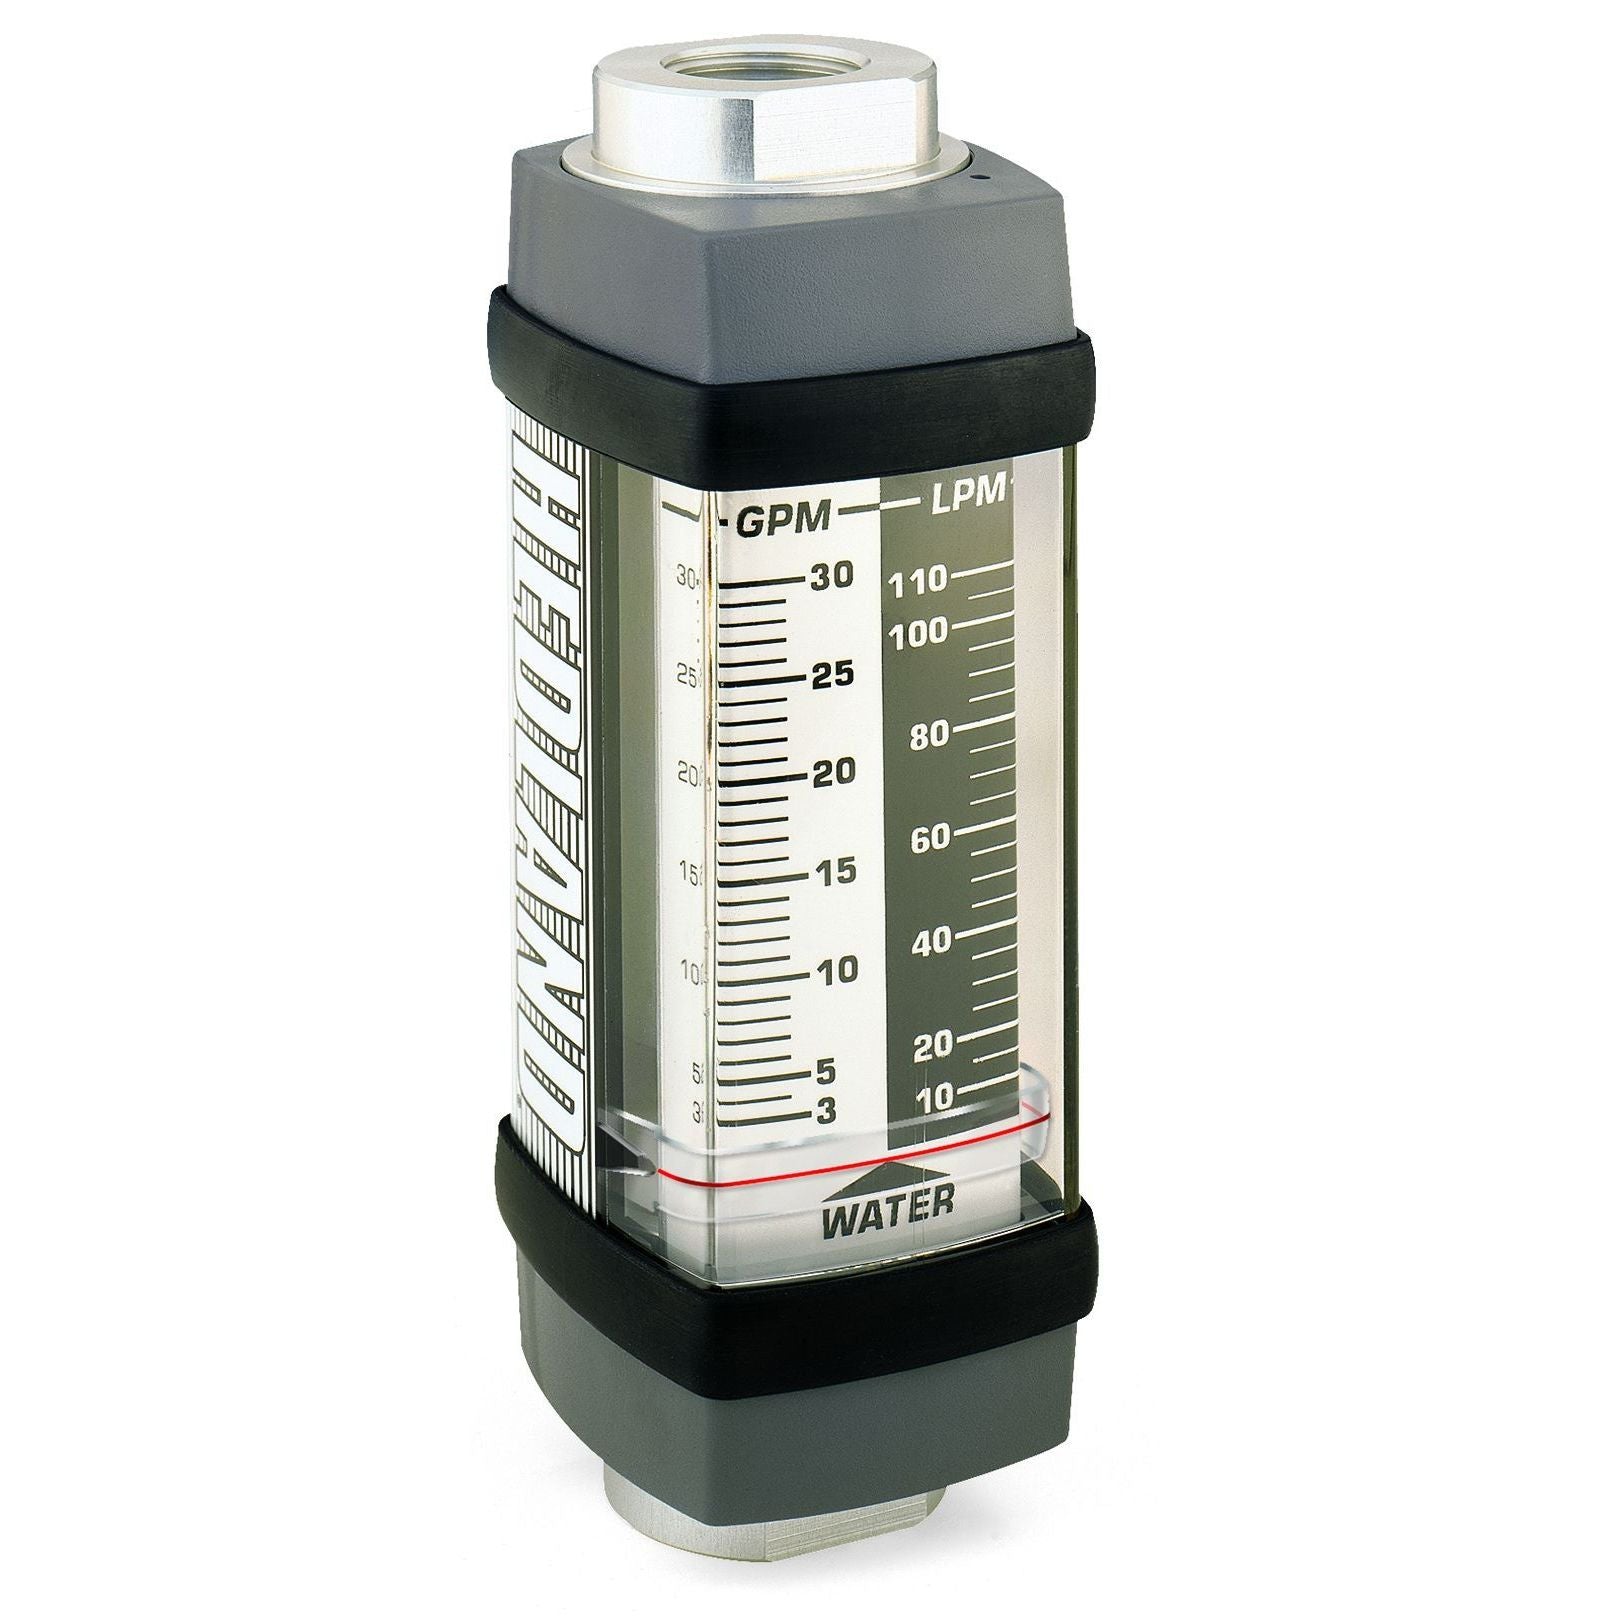 H844X-100 : Hedland 5000psi 316SS Flow Meter for Caustic or Corrosive Liquids, 1 NPT, 10 to 100 GPM